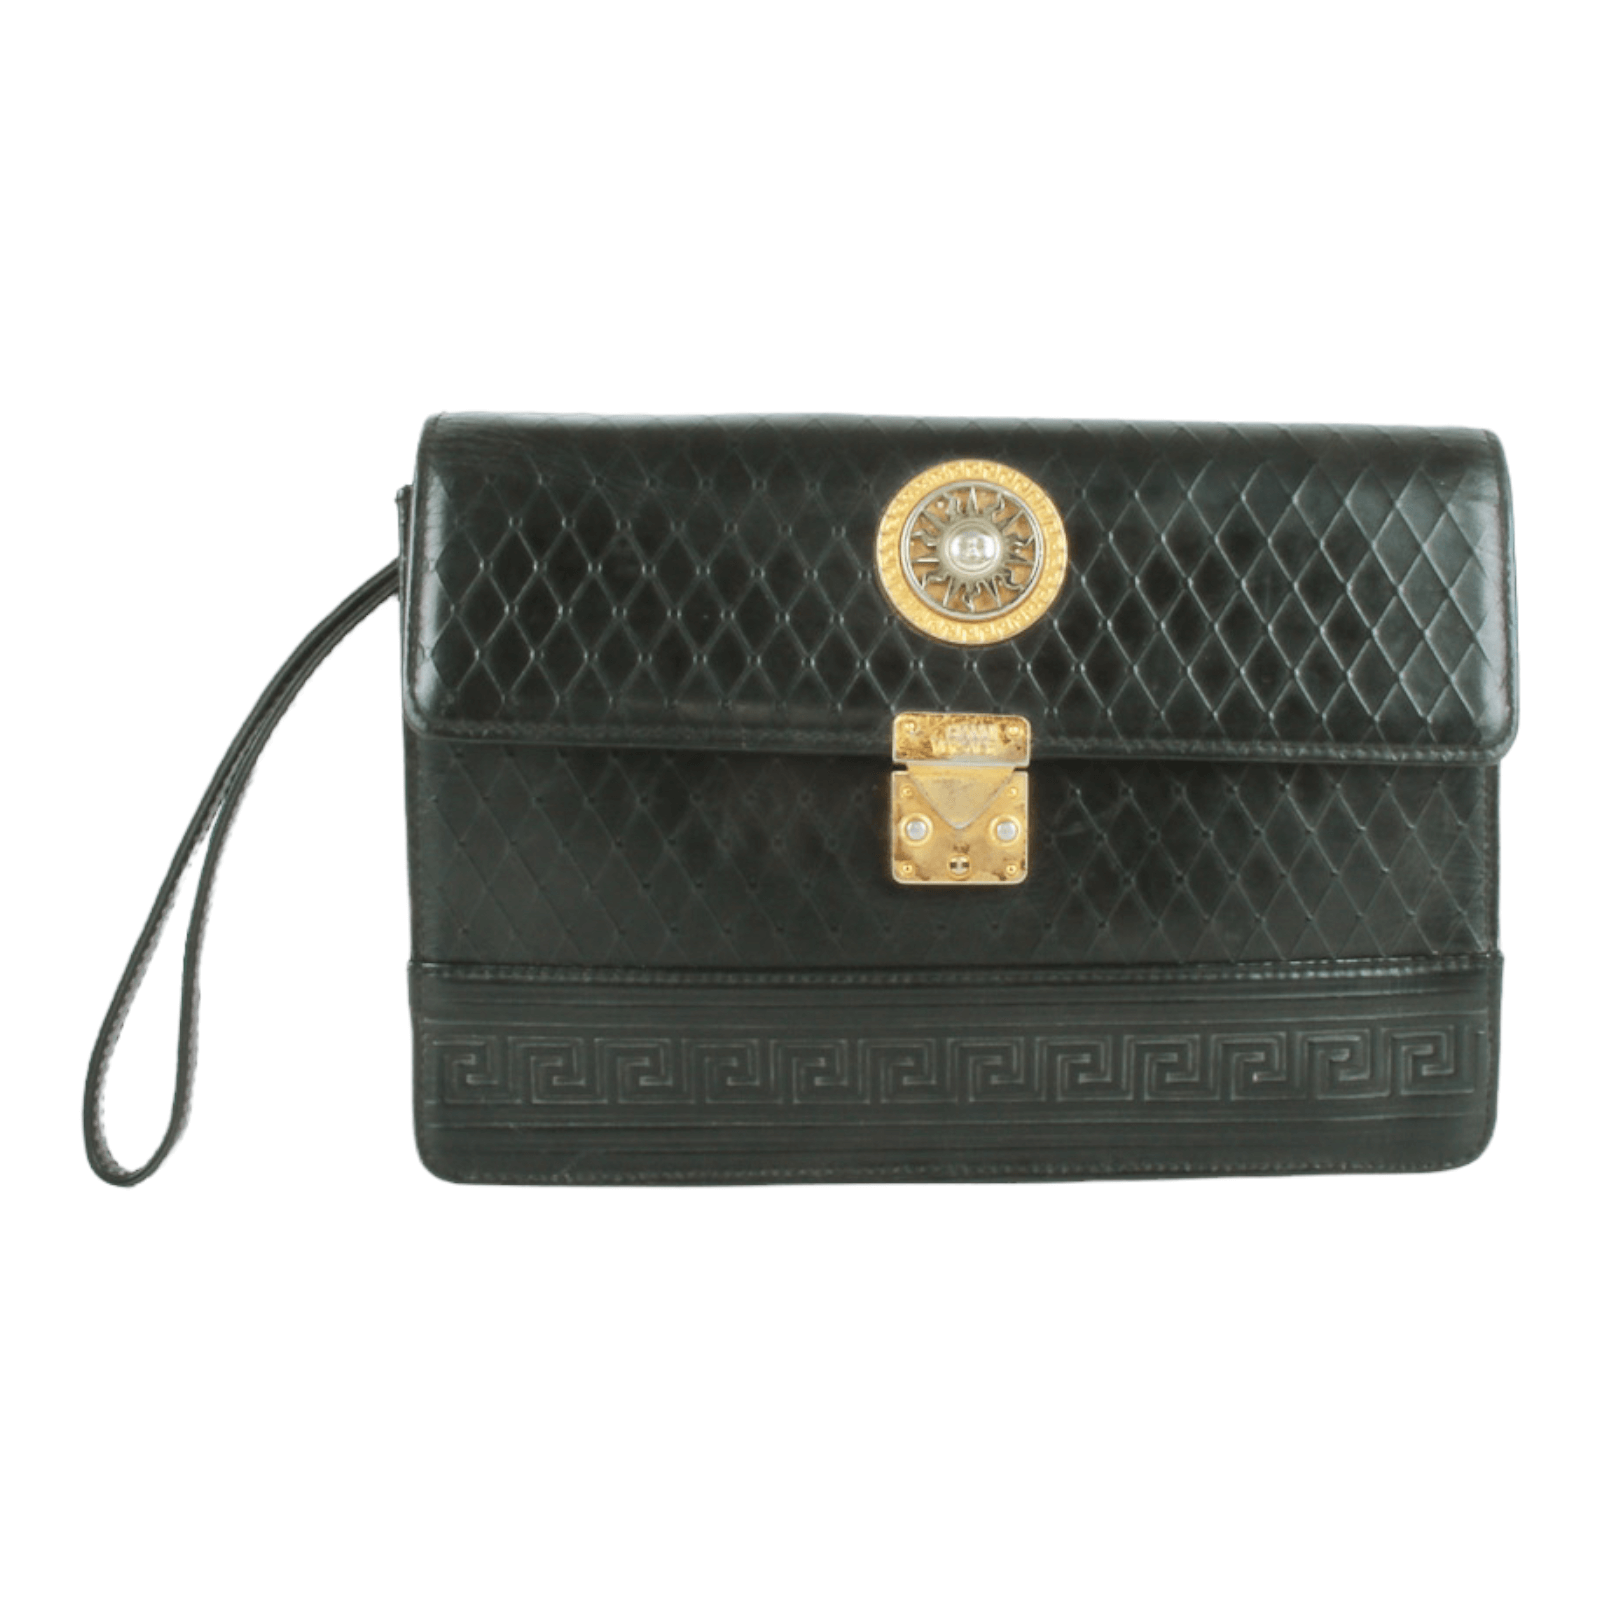 OLD-TIME] Early second-hand old bag GIANNI VERSACE handbag made in